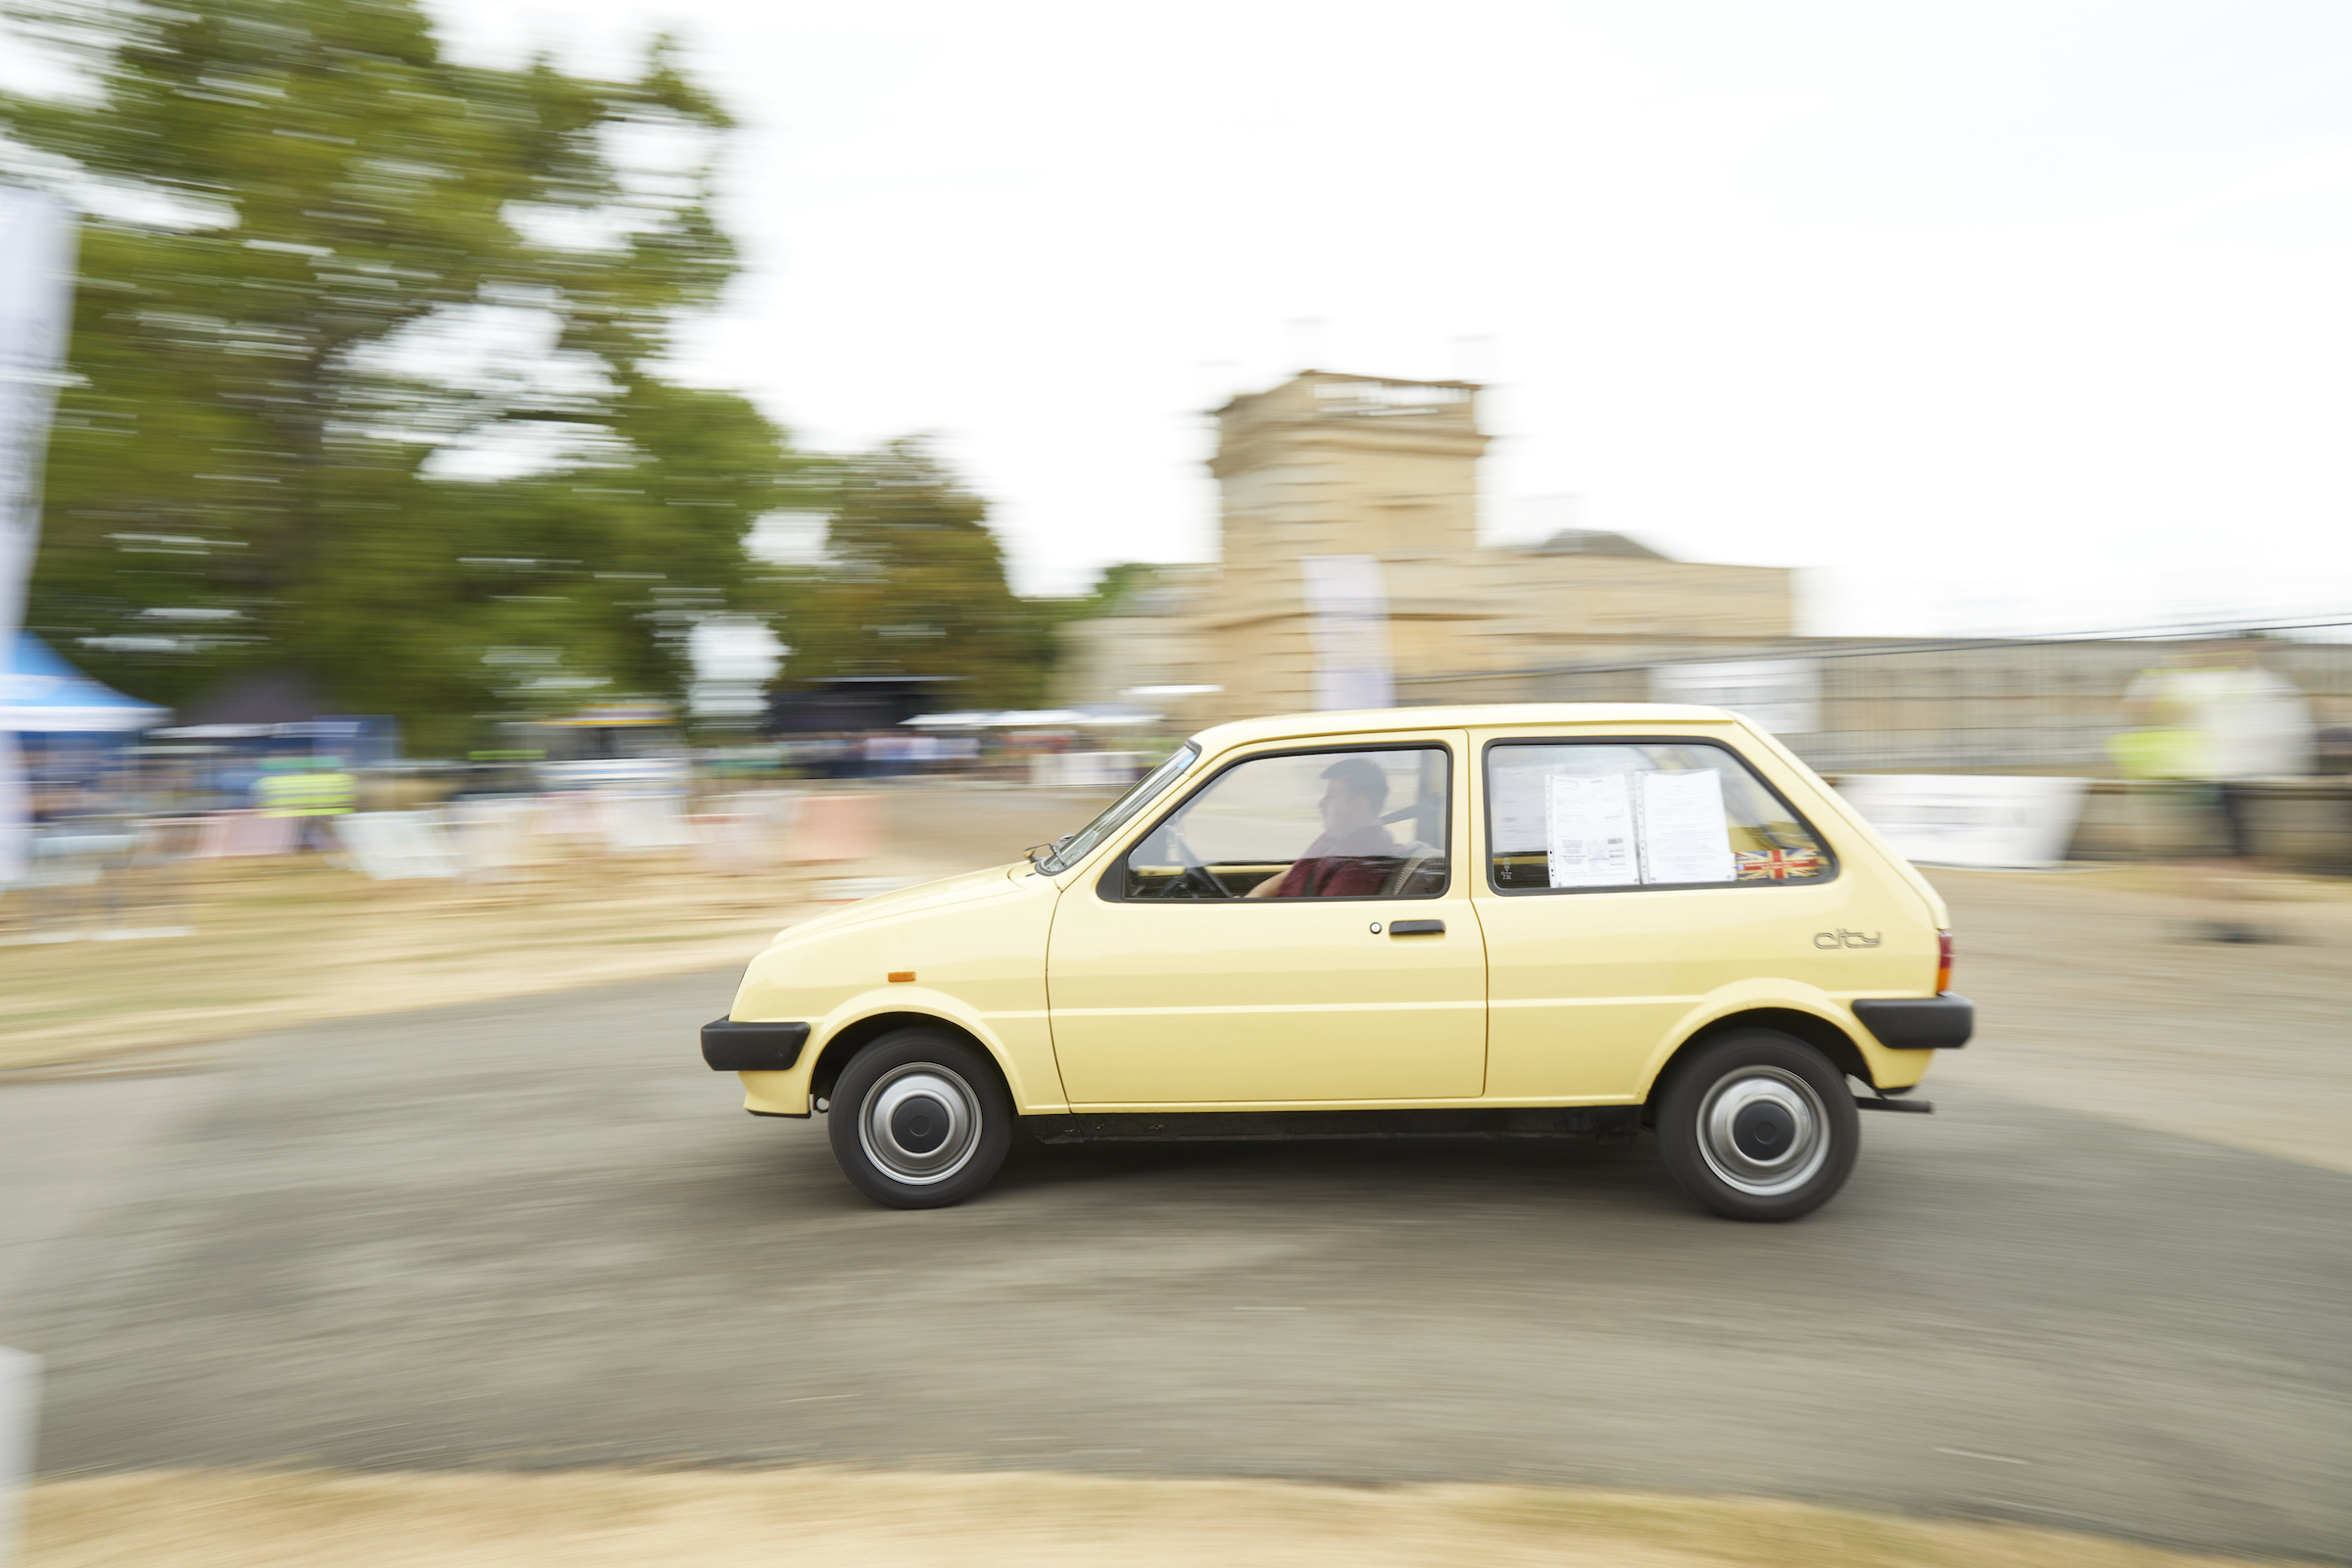 2022 Festival of the Unexceptional mega gallery – photos and videos!